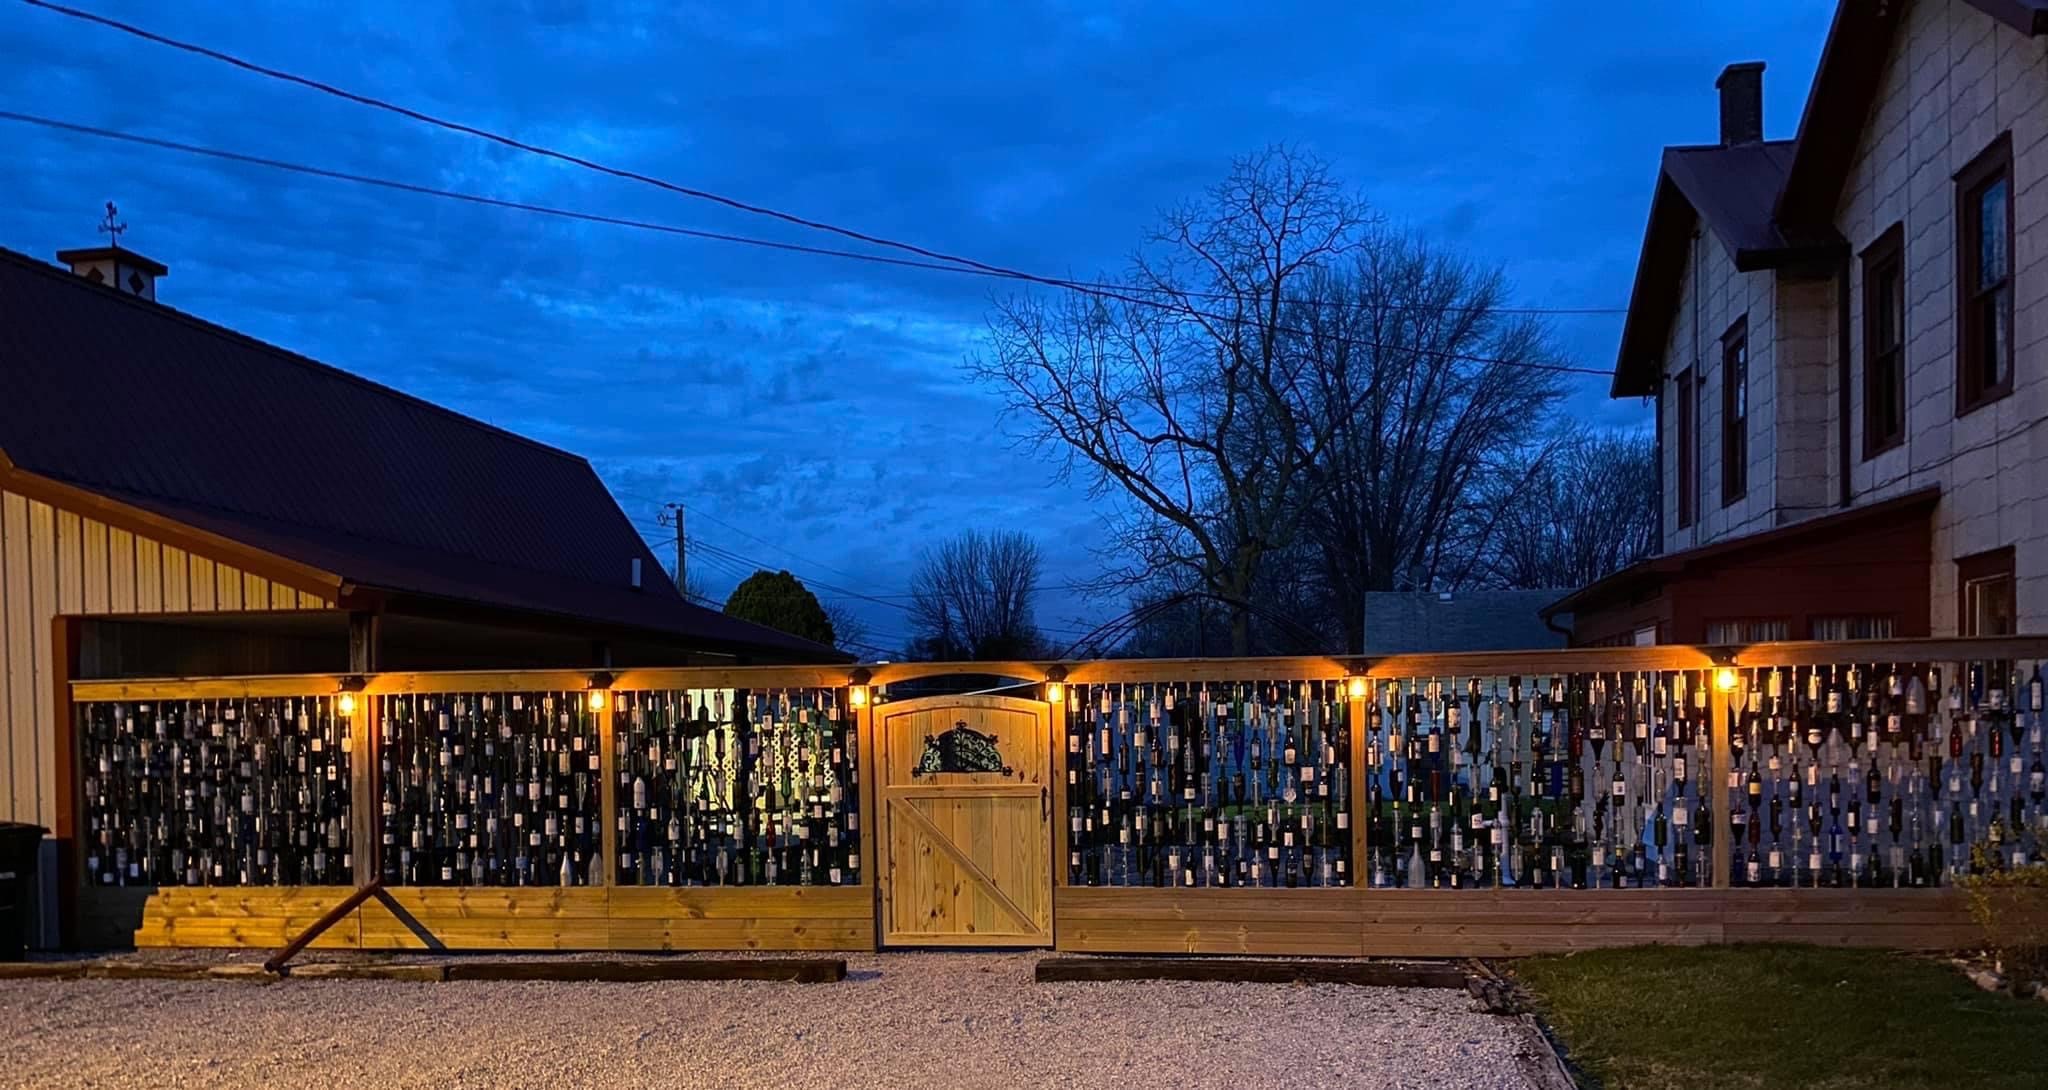  Brad built this wine bottle fence as a statement piece between his house and garage. Local photographers use it as a backdrop.